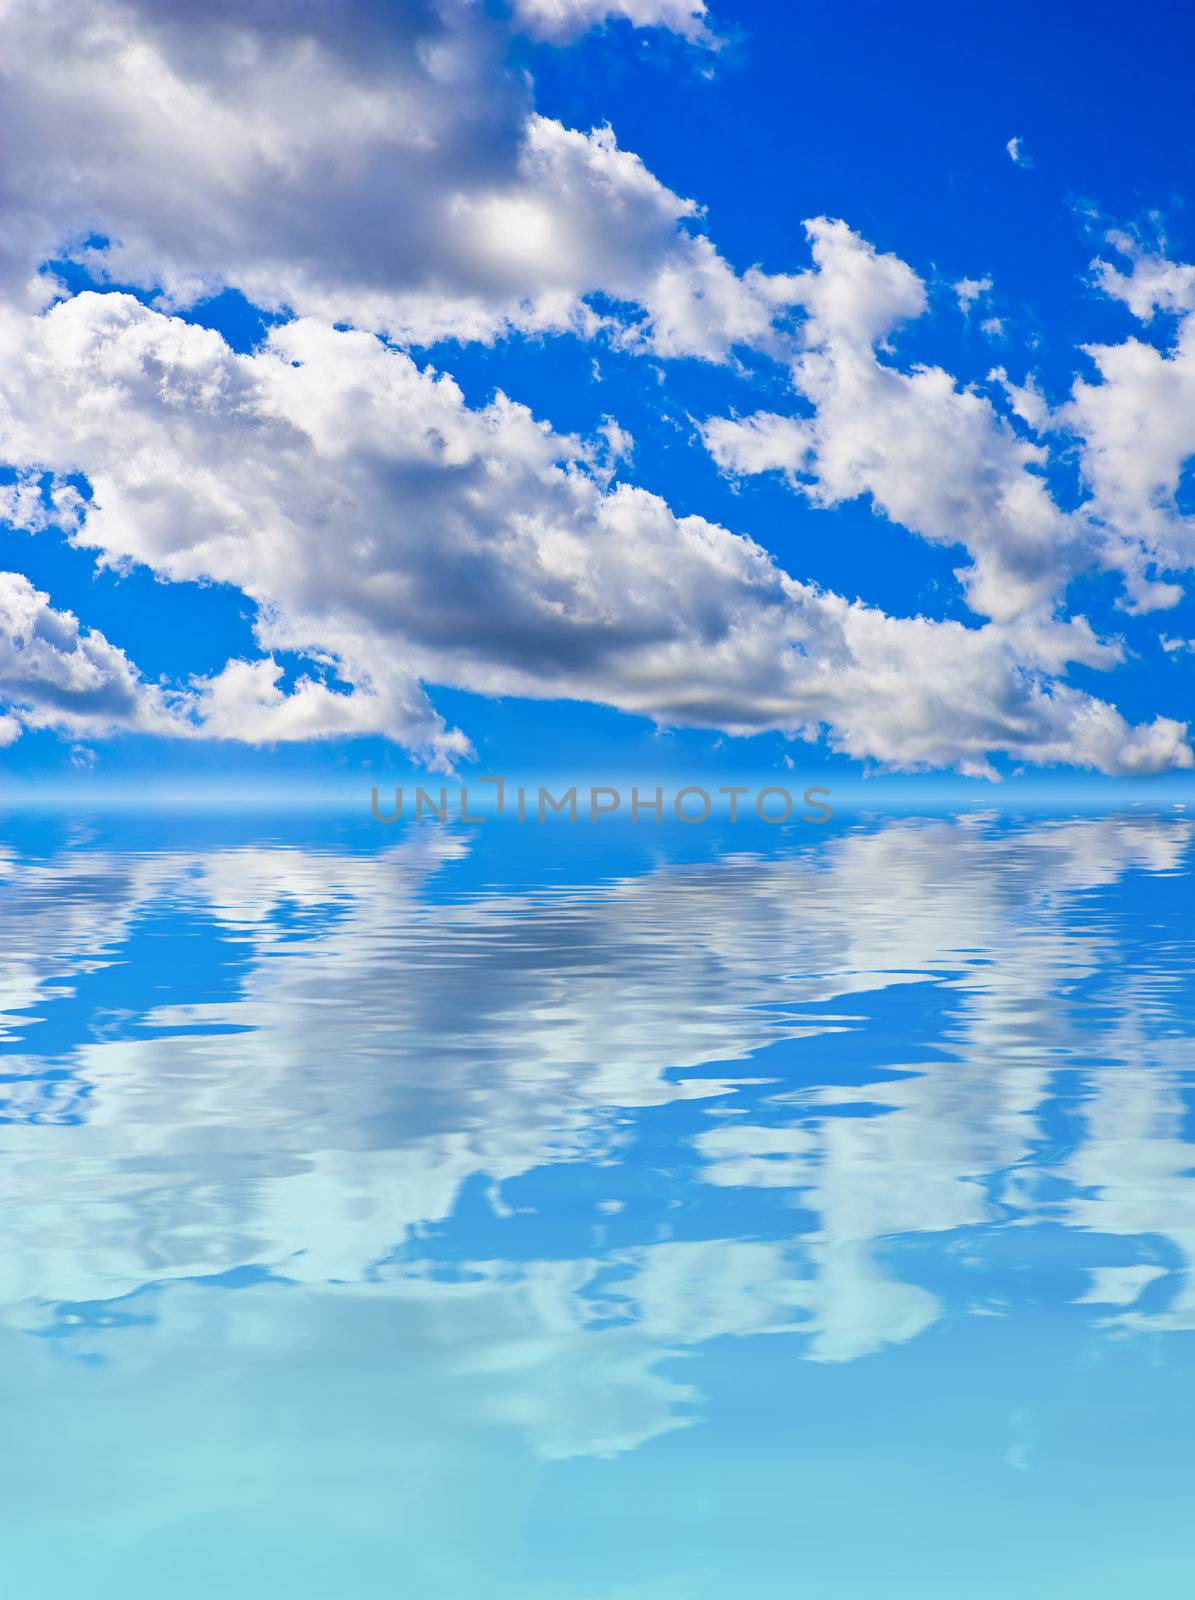 Scenery background - clouds in blue sky reflection in water by mozzyb